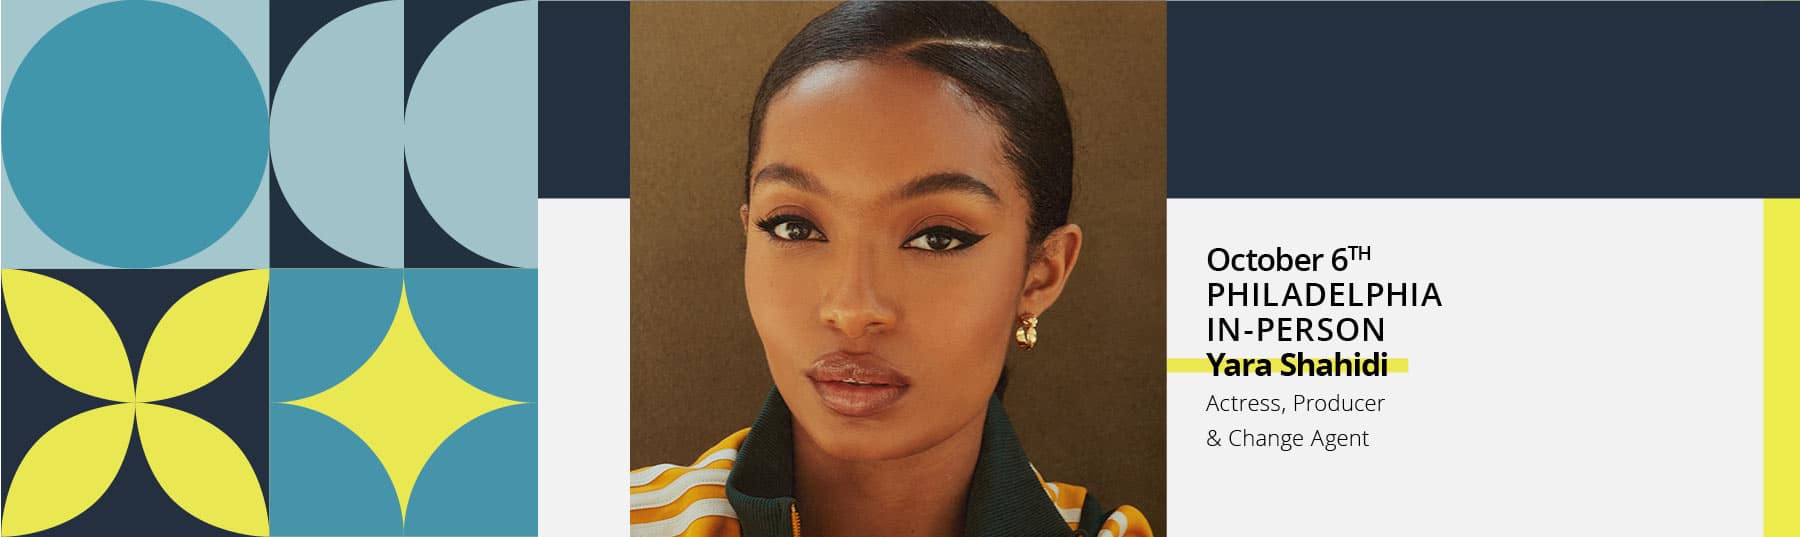 Join Yara Shahidi in-person on October 6th at the virtual Pennsylvania Conference for Women